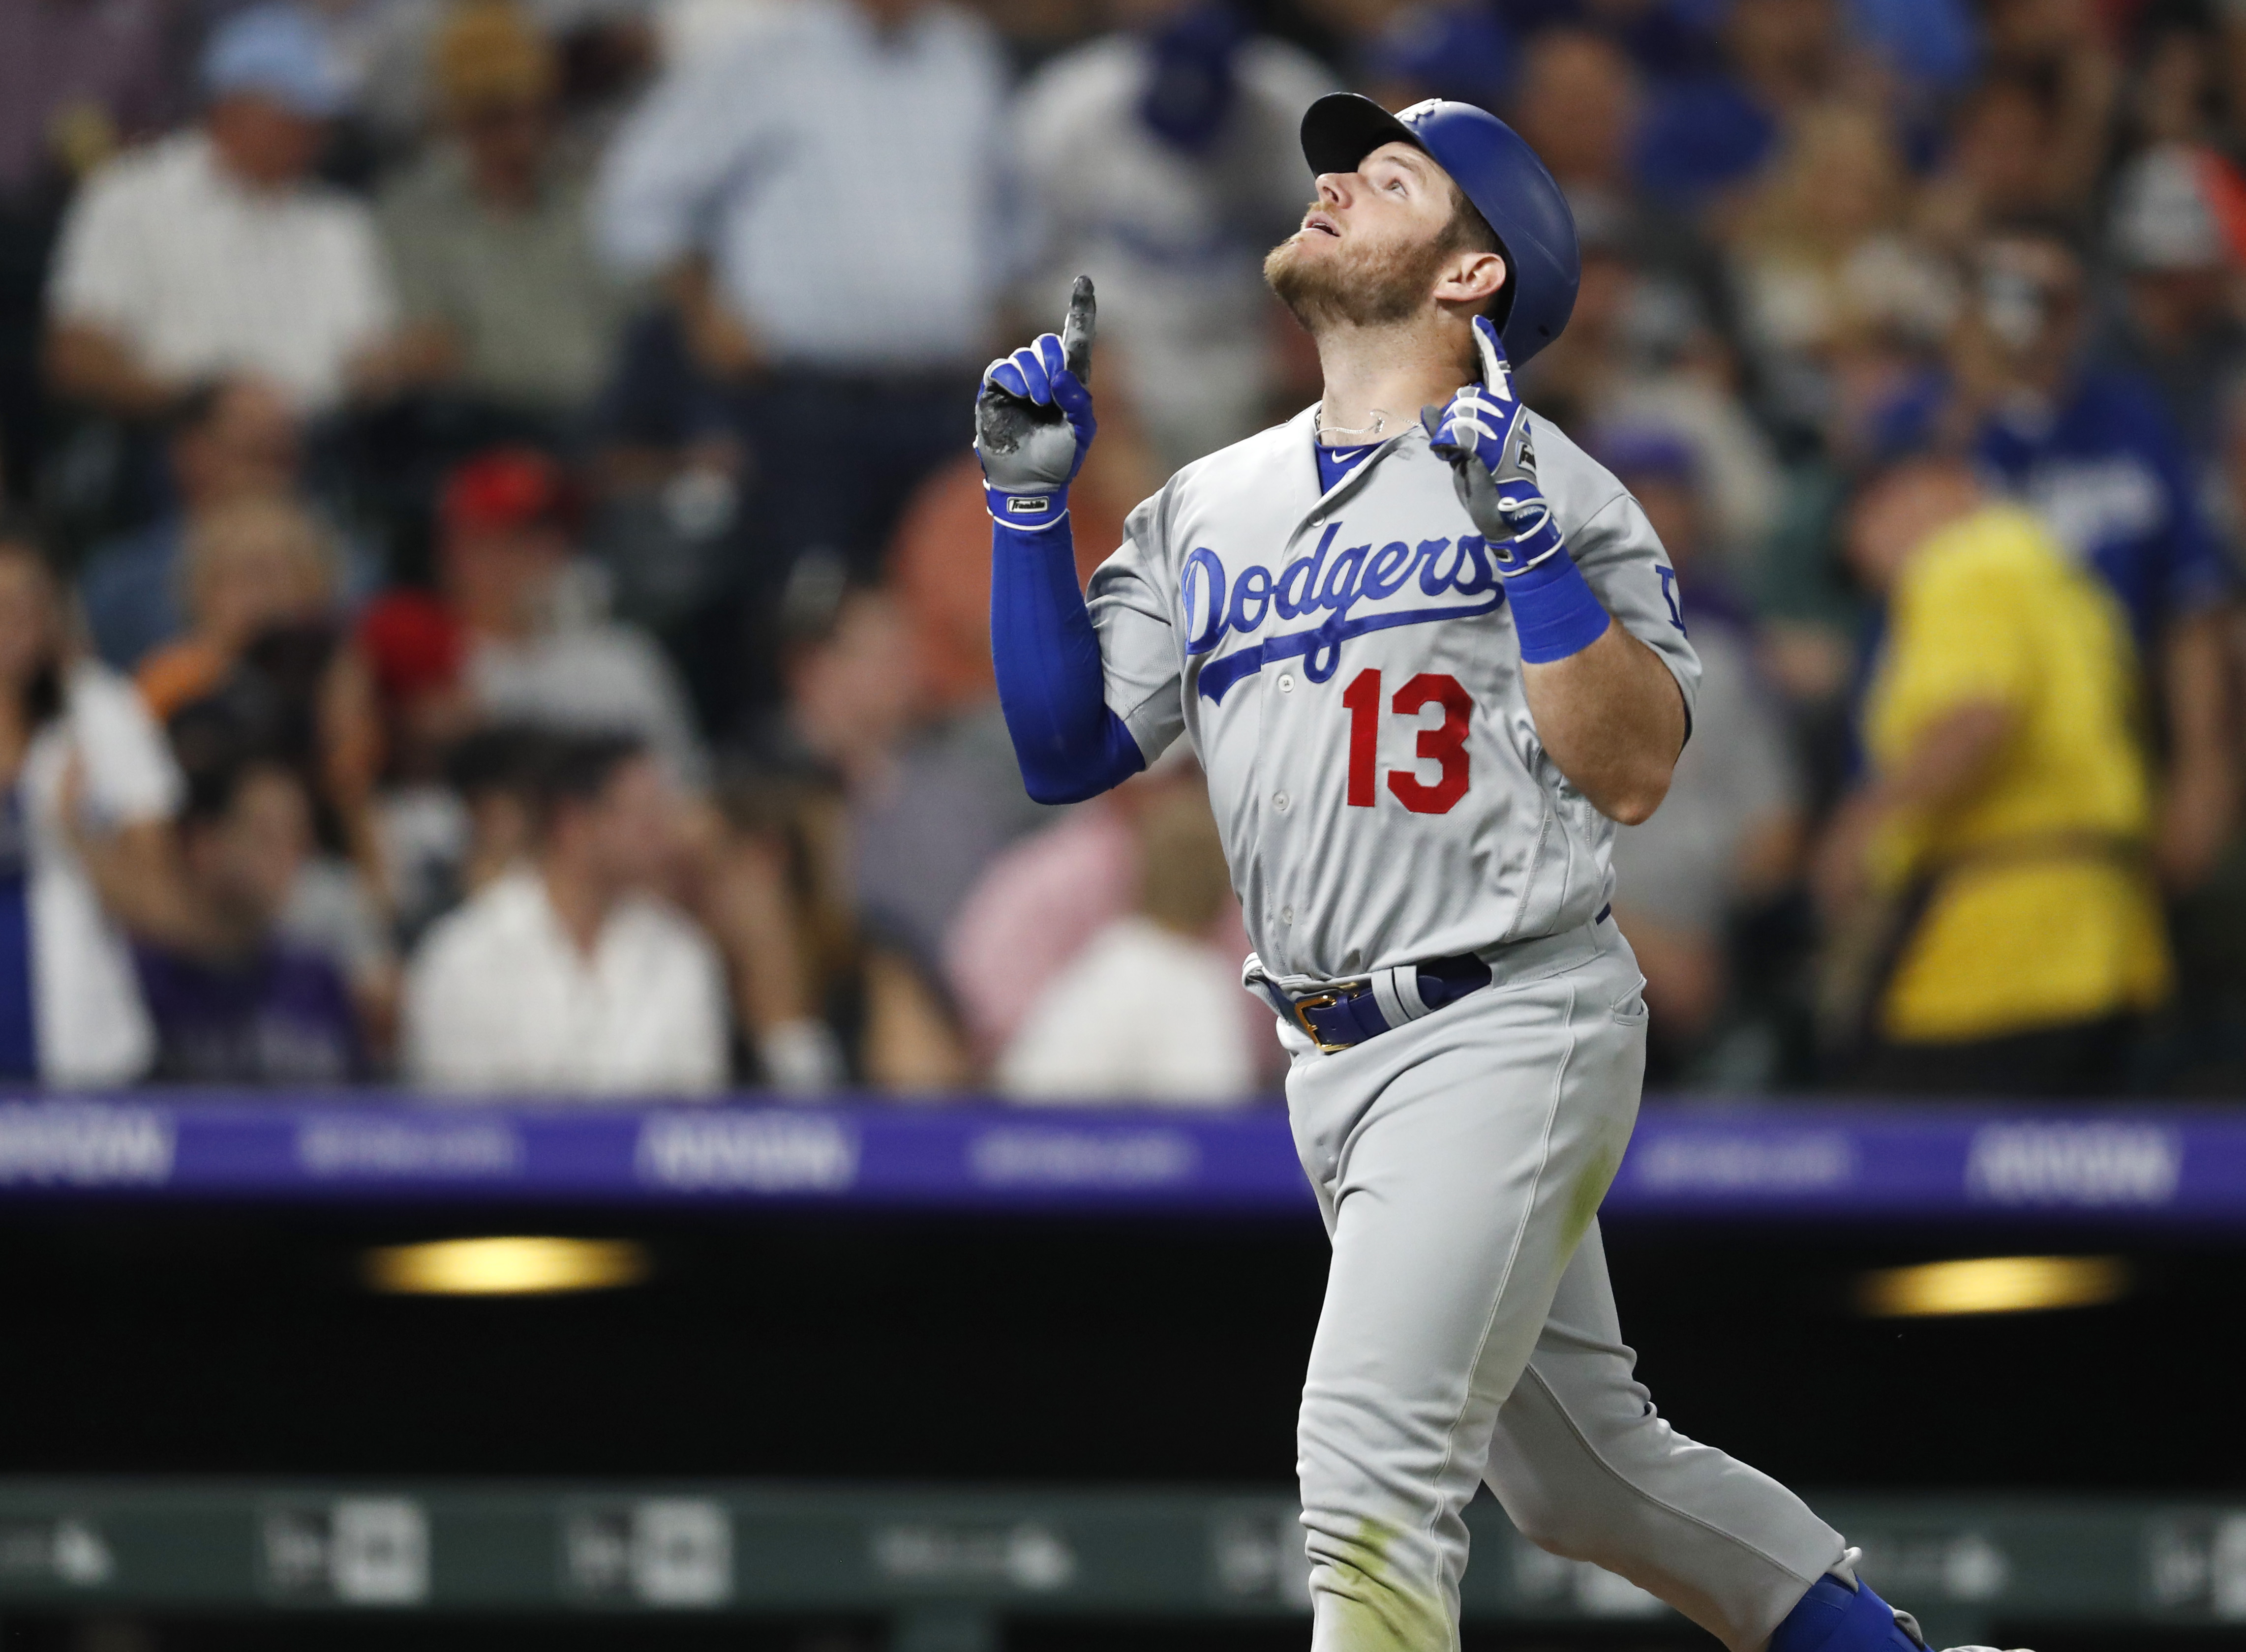 Taylor, Muncy help Dodgers stage another late win over Rox